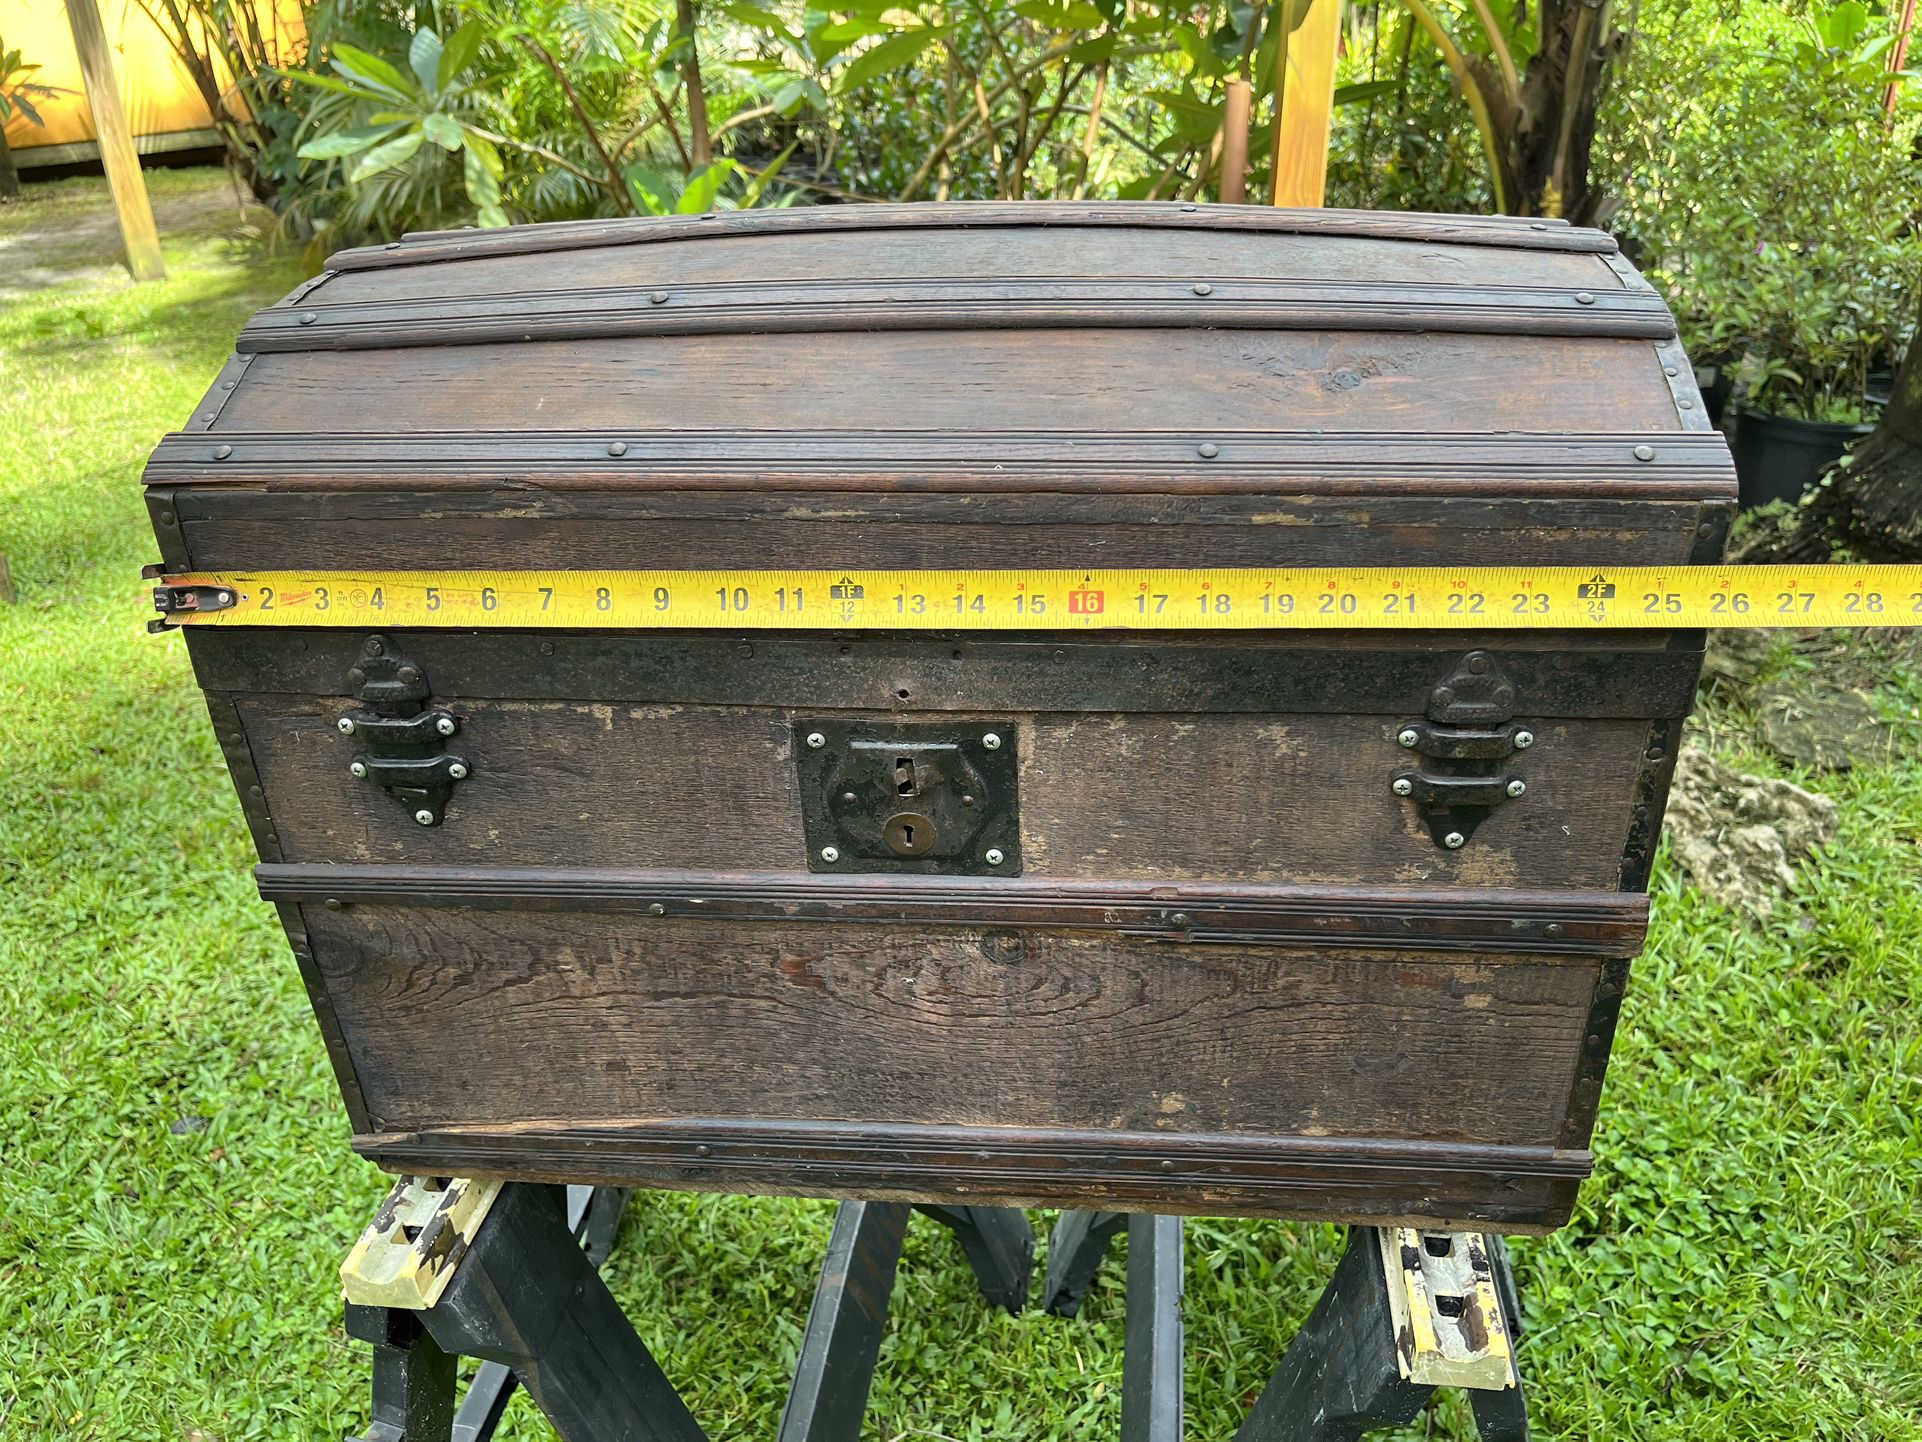 Louis Vuitton Late 1800s Steamer Trunk for Sale in Fort Lauderdale, FL -  OfferUp